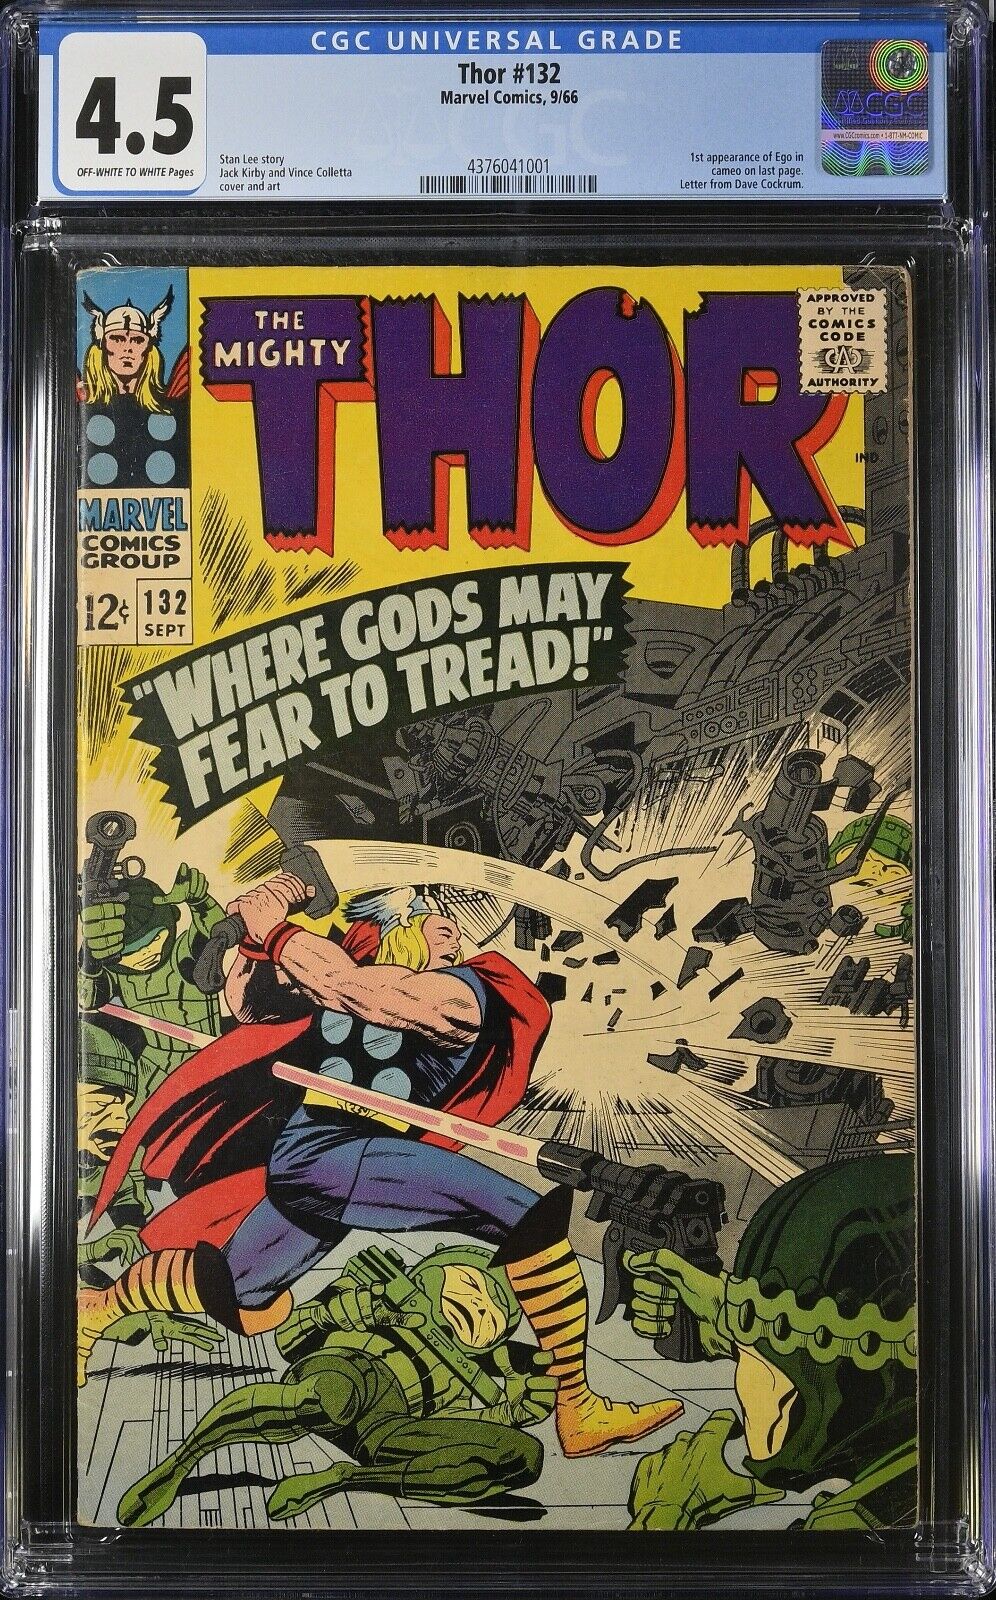 Thor #132, Marvel (1966) CGC 4.5 (VG+) - 1st app Ego in cameo